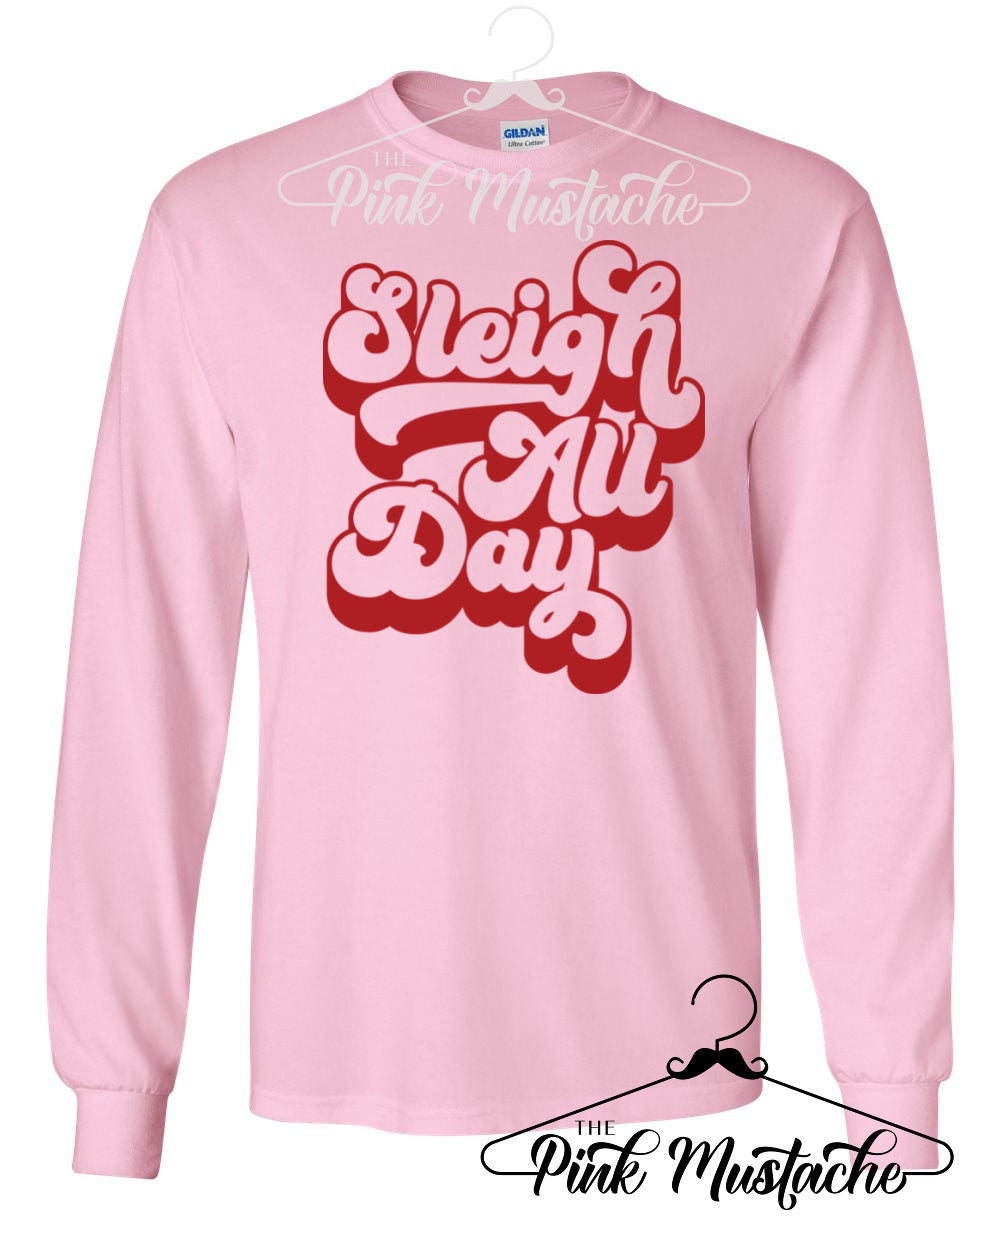 Long Sleeve Pink Sleigh All Day Christmas Tee / Toddler, Youth, and Adult Sizes/ Softstyle Tee / Christmas Shirt